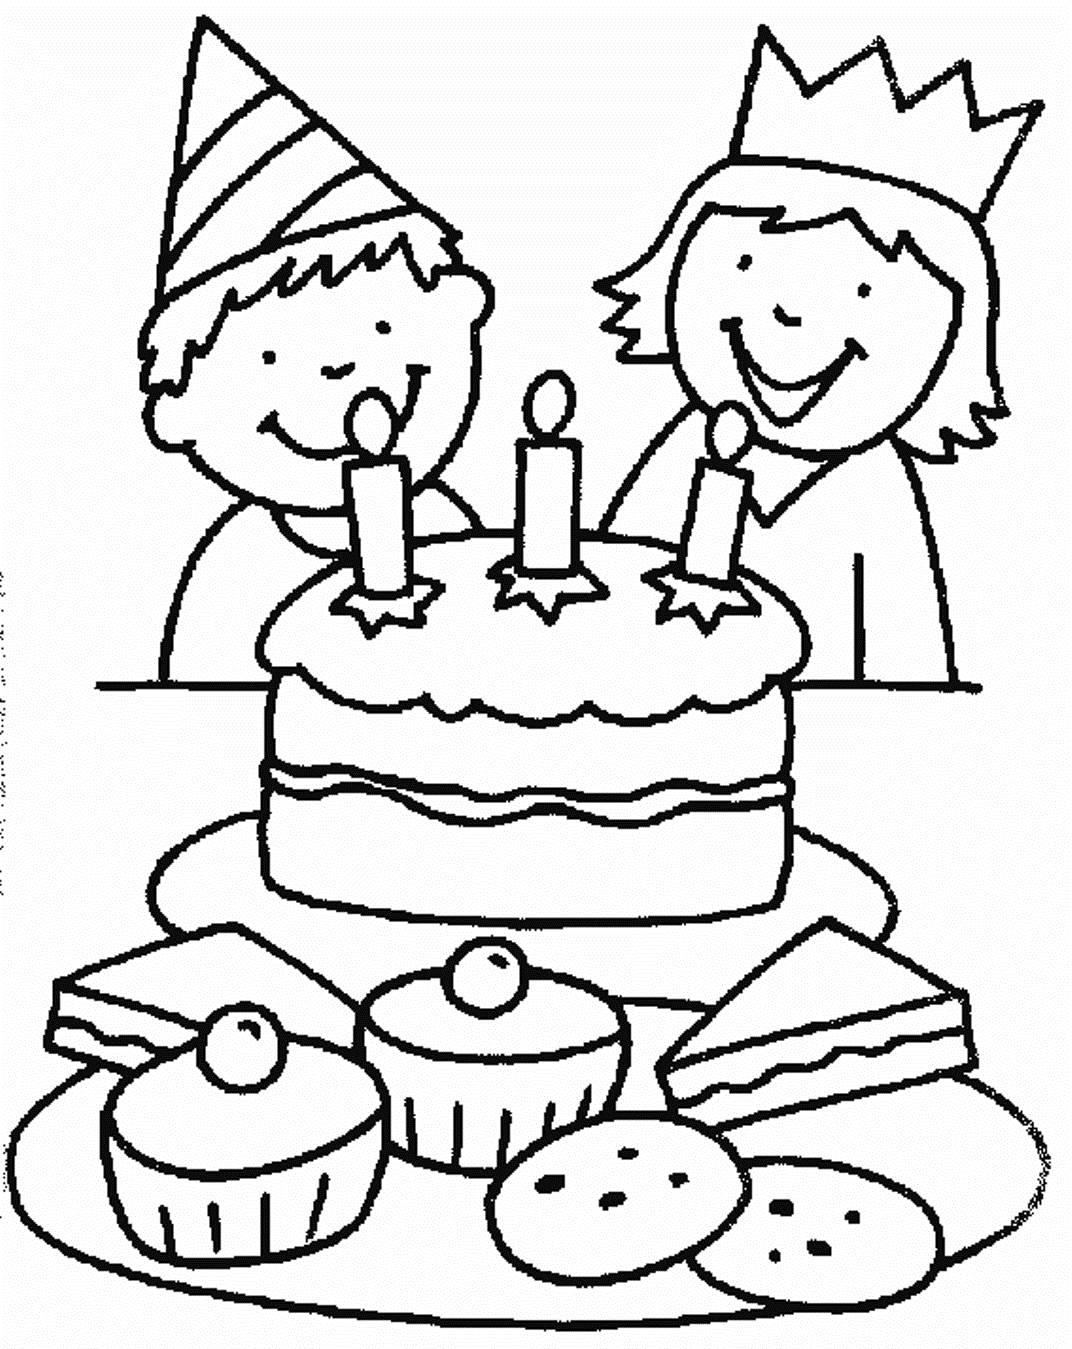 Coloring Pages Birthday Party Decorations - Coloring Pages For All ...